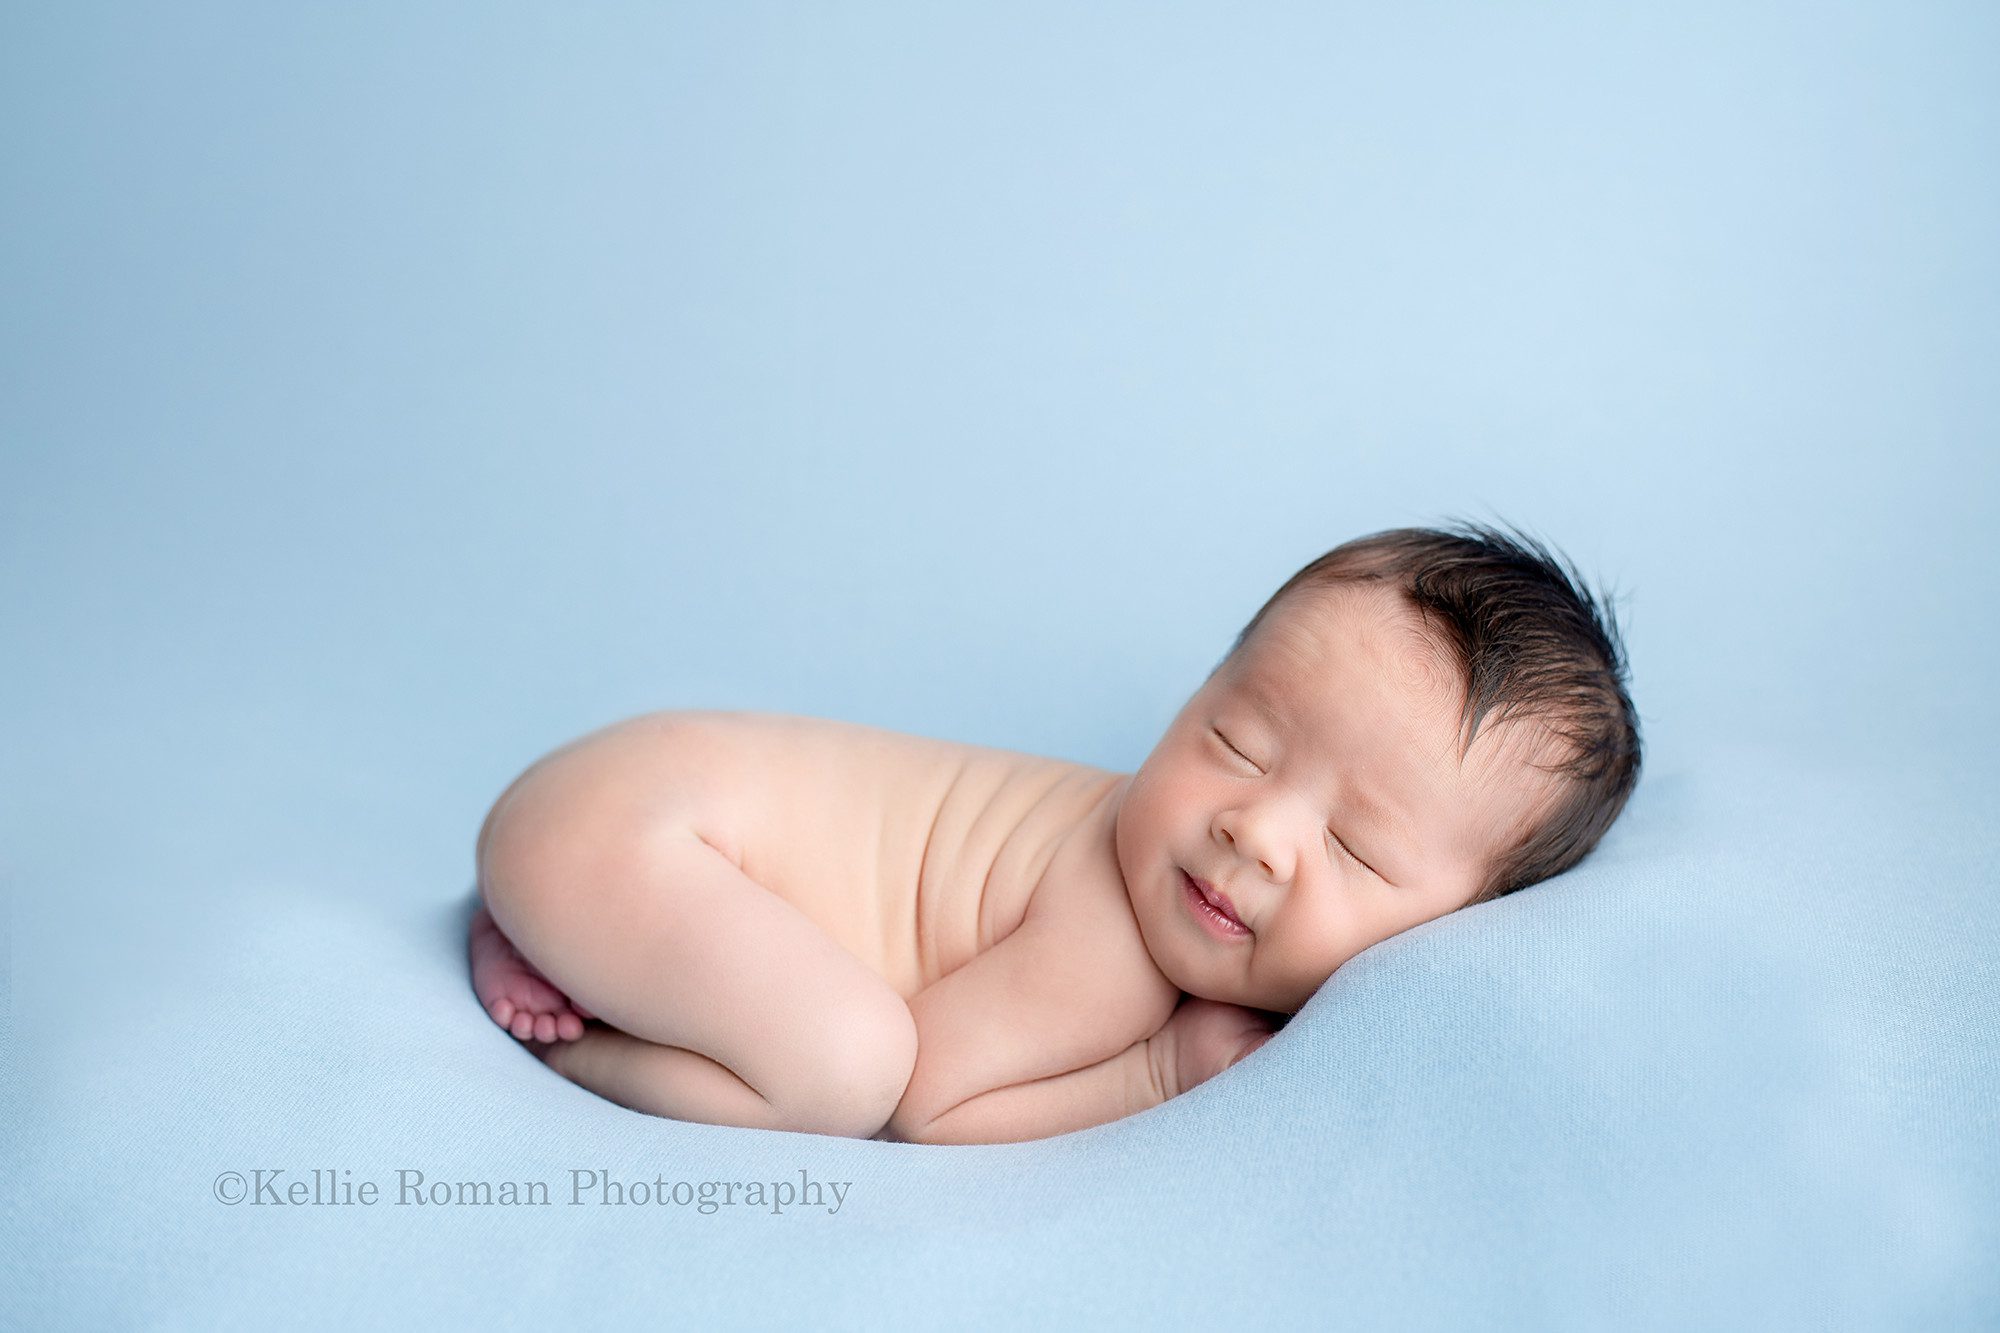 bright airy newborn session a little boy in a milwaukee Wisconsin photographers studio he is posed on his belly curled up onto of a blue blanket the little boy has brown hair and is smiling in the shot